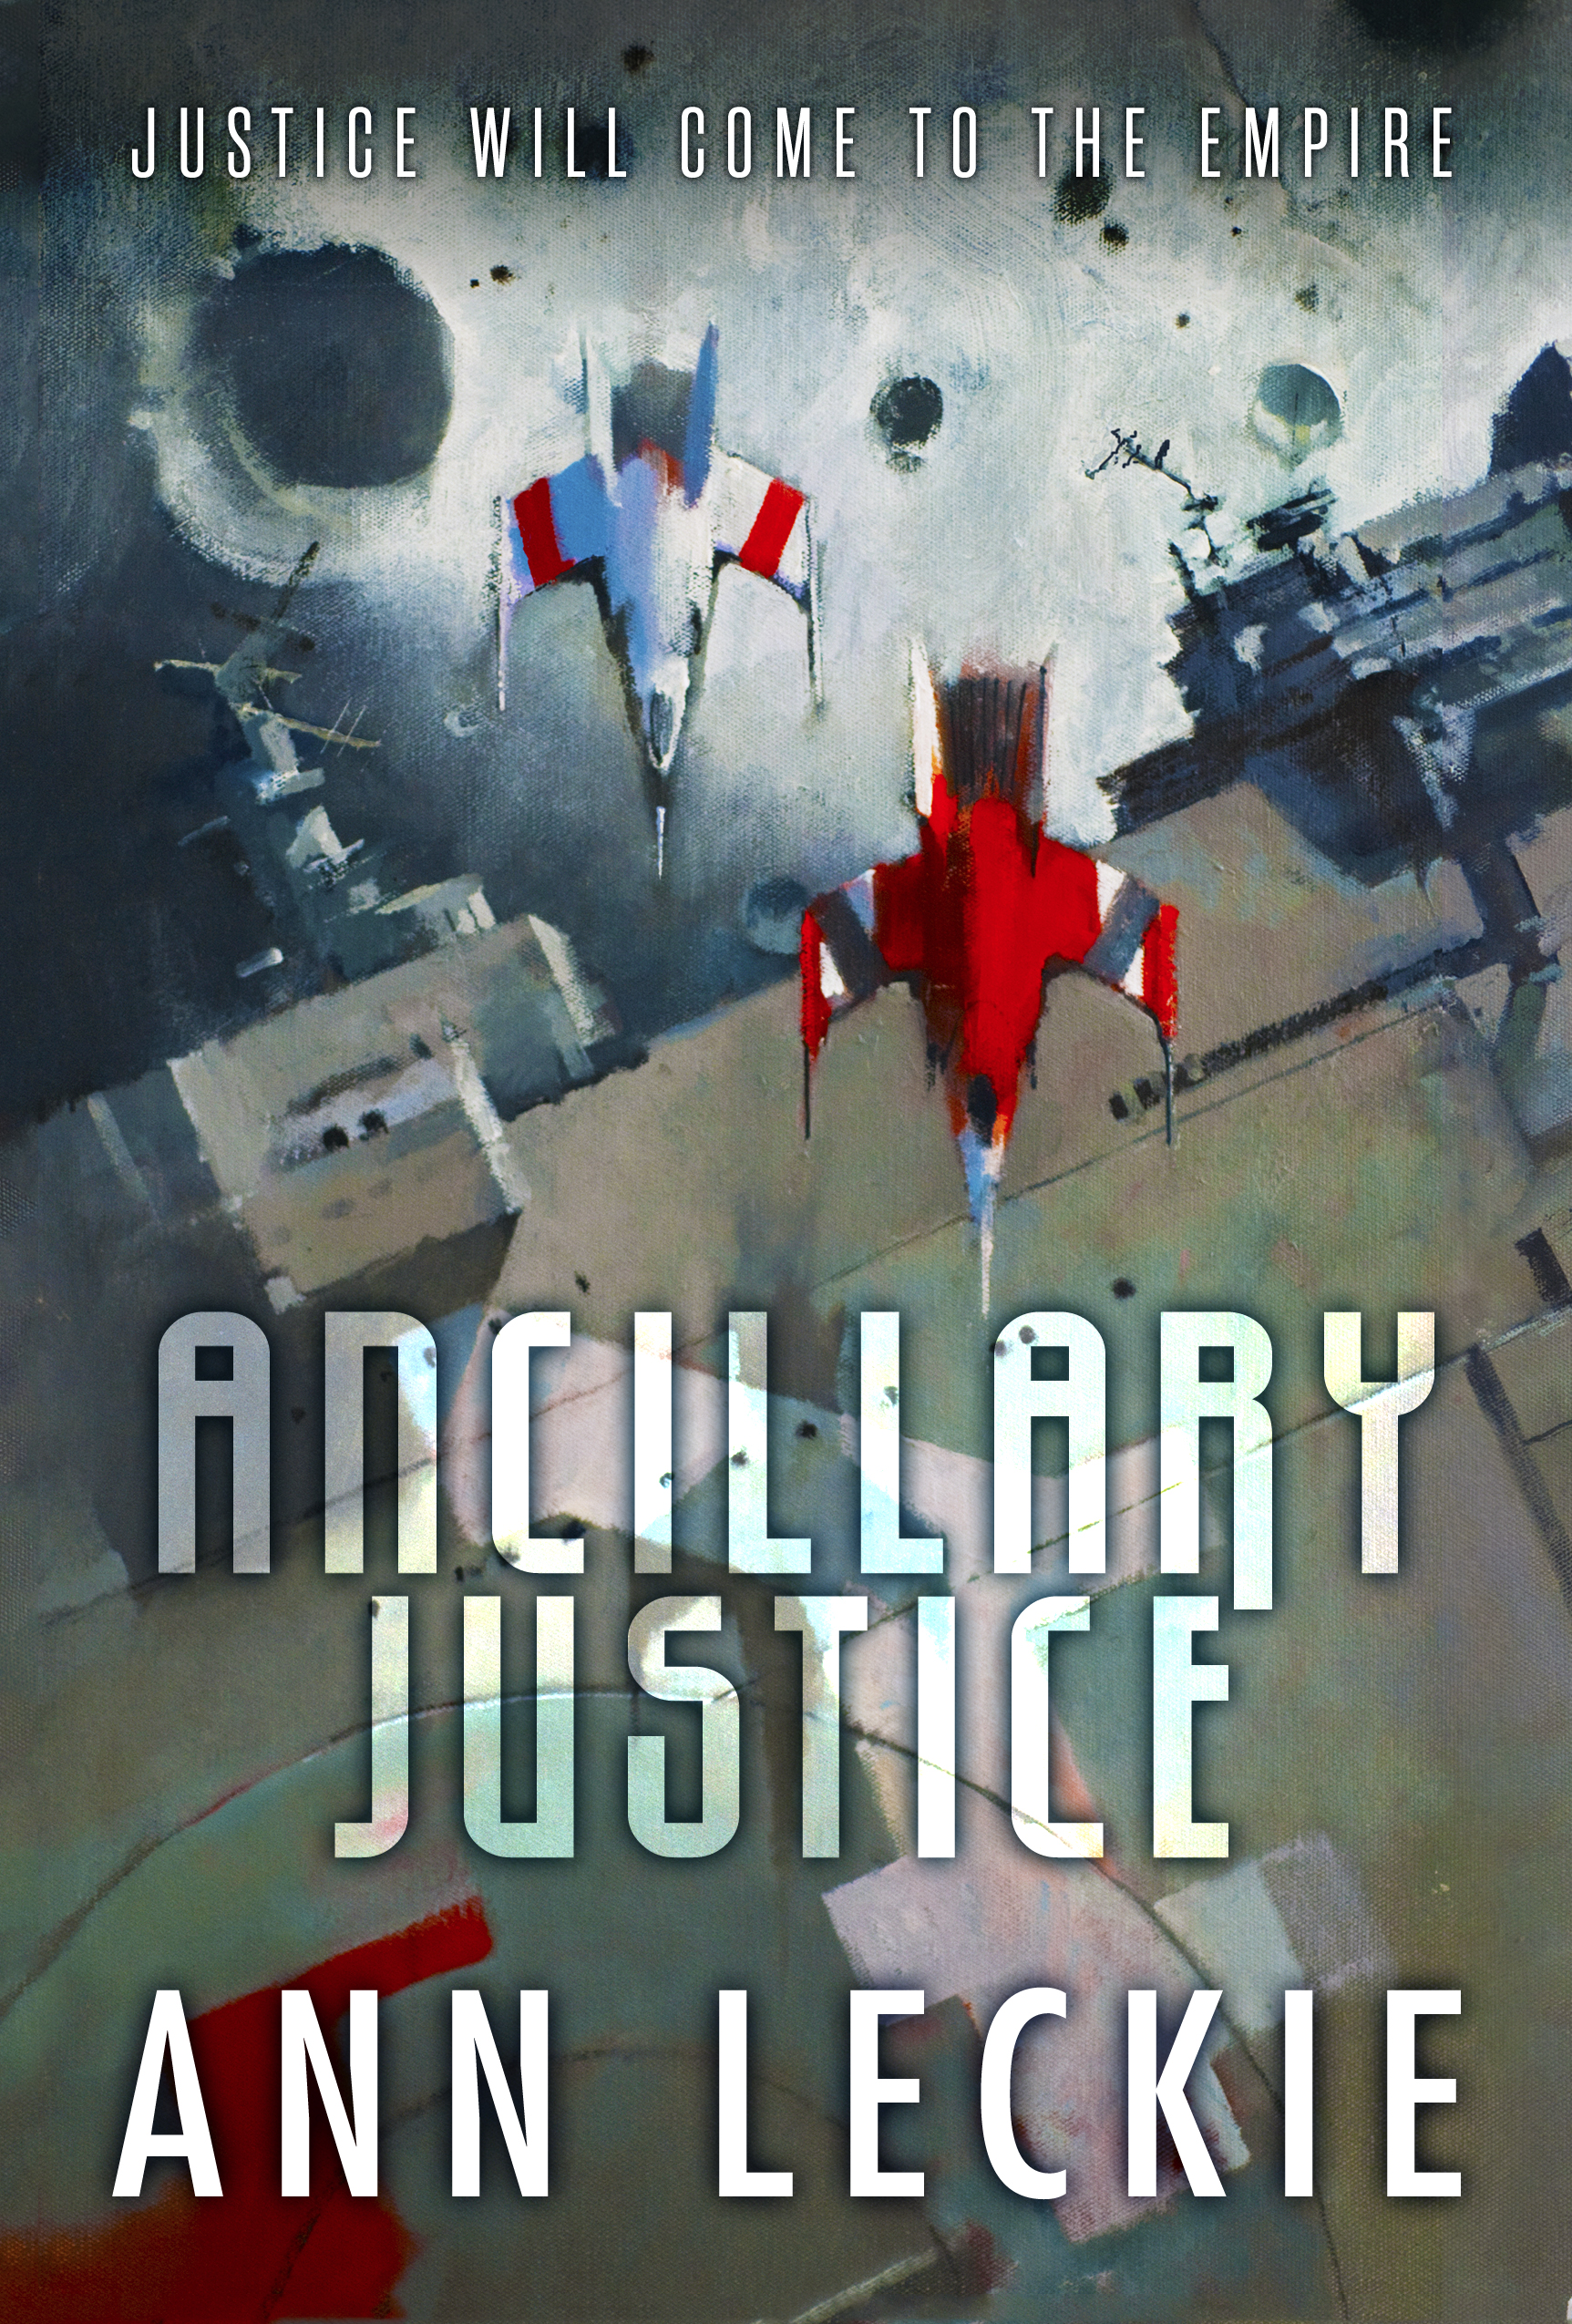 ancillary justice book discussion madrid ann leckie club